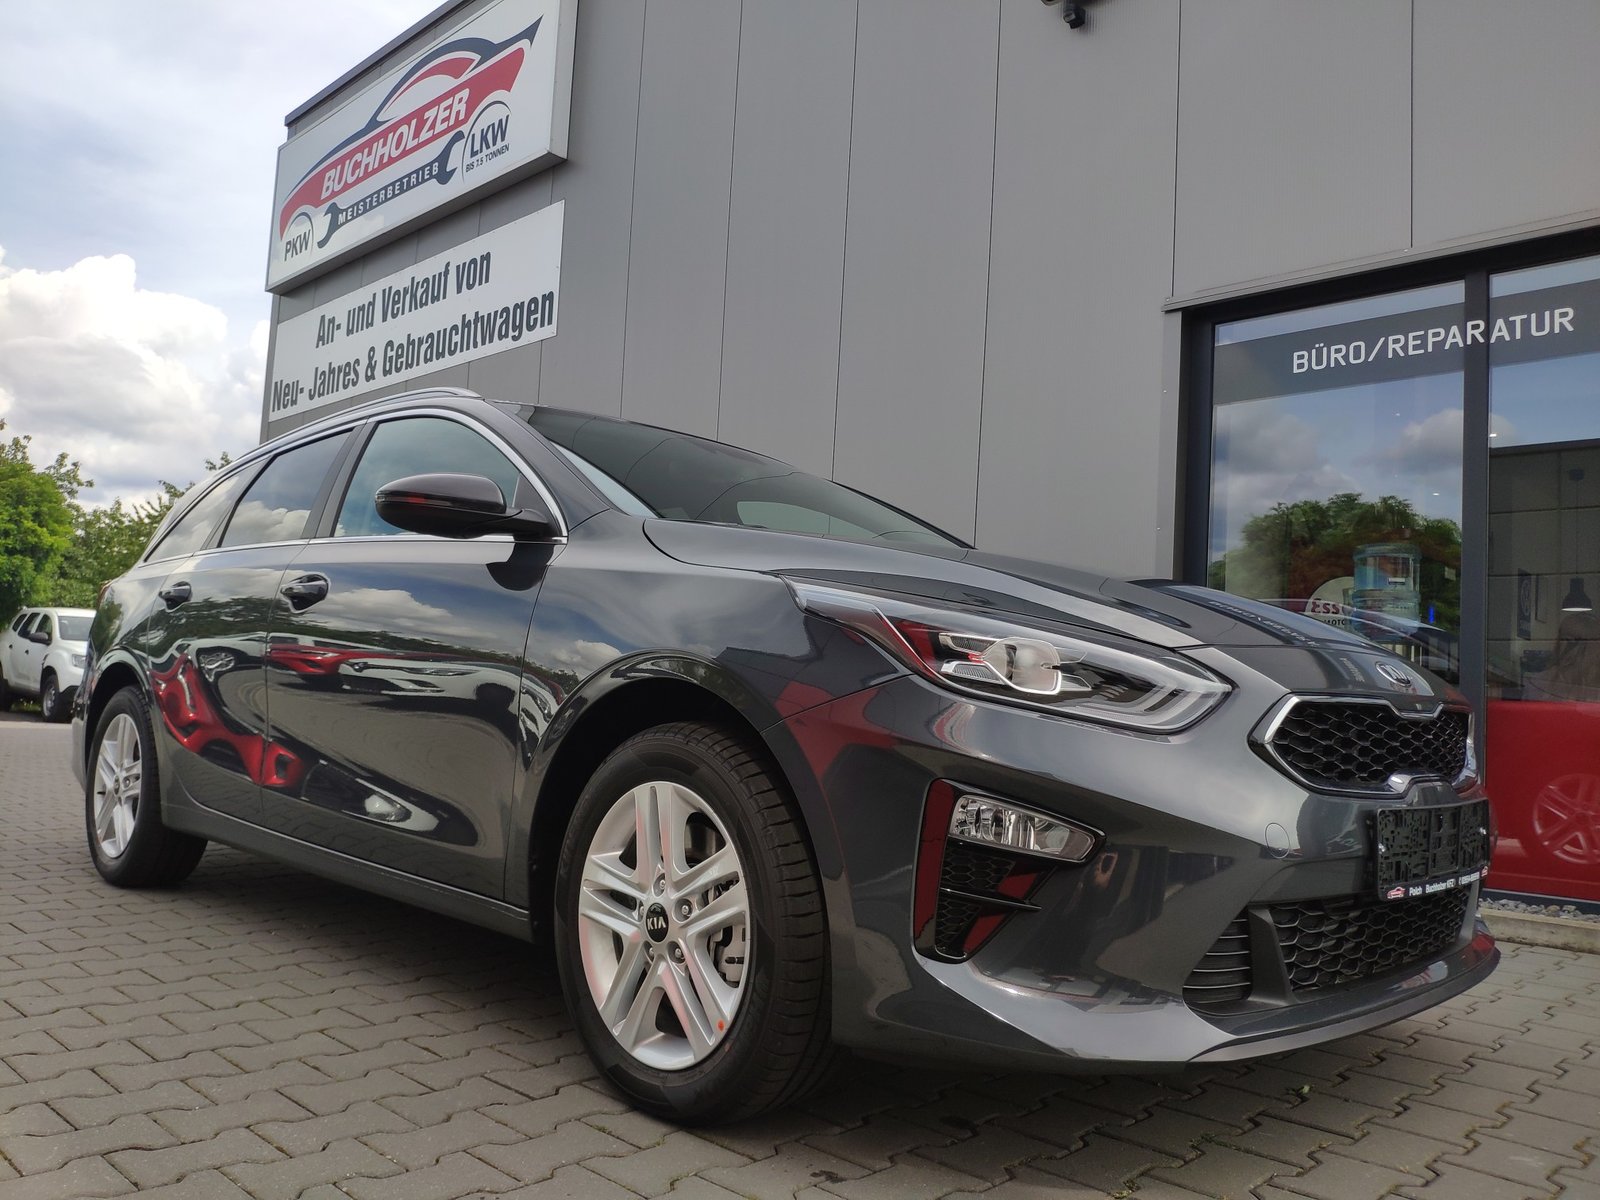 KIA CEED Cee'd 160PS SW Kamera*Sitzheizung*App-Connect! Autosoft BV, Enschede